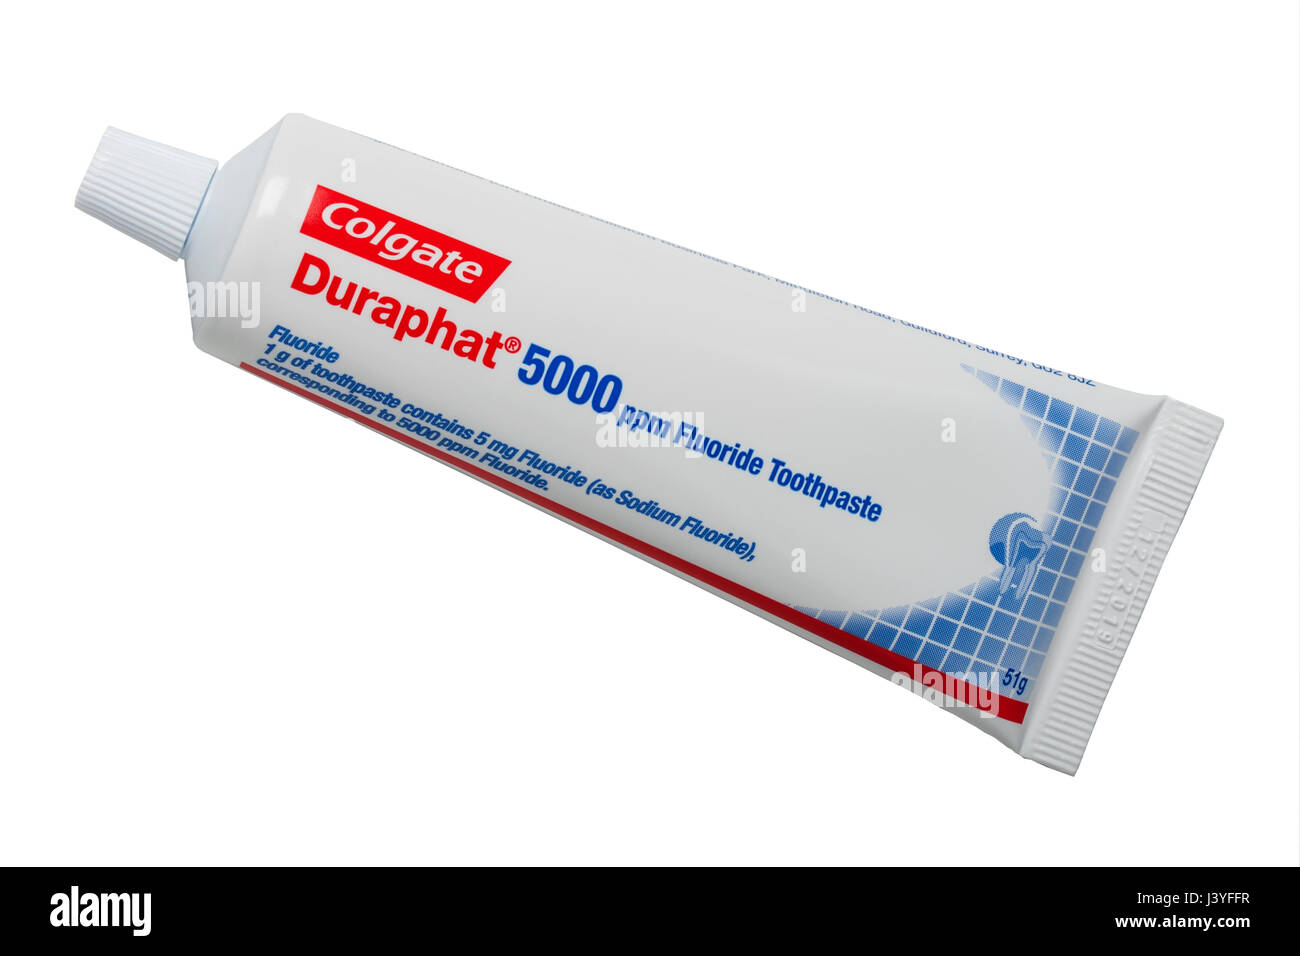 A tube of Colgate Duraphat 5000ppm Flouride Toothpaste on a white background Stock Photo